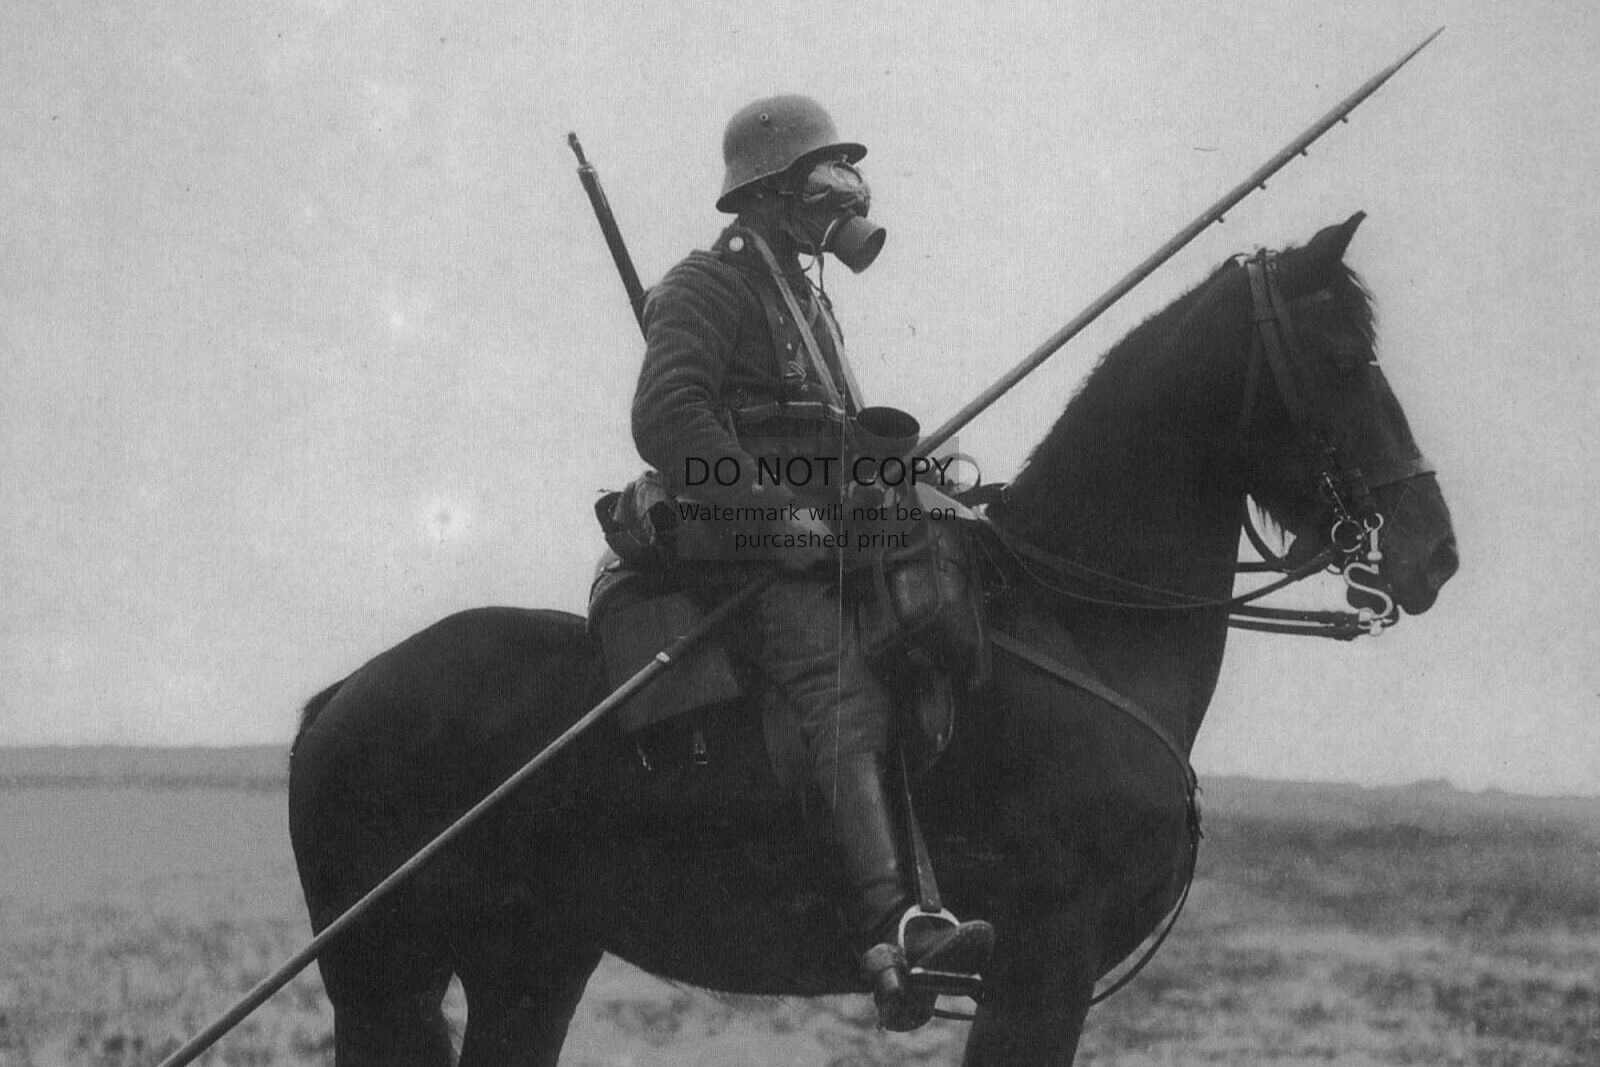 GERMAN CALVALRY SOLDIER PATROLING WITH GAS MASK AND LANCE WW1 4X6 PHOTO POSTCARD